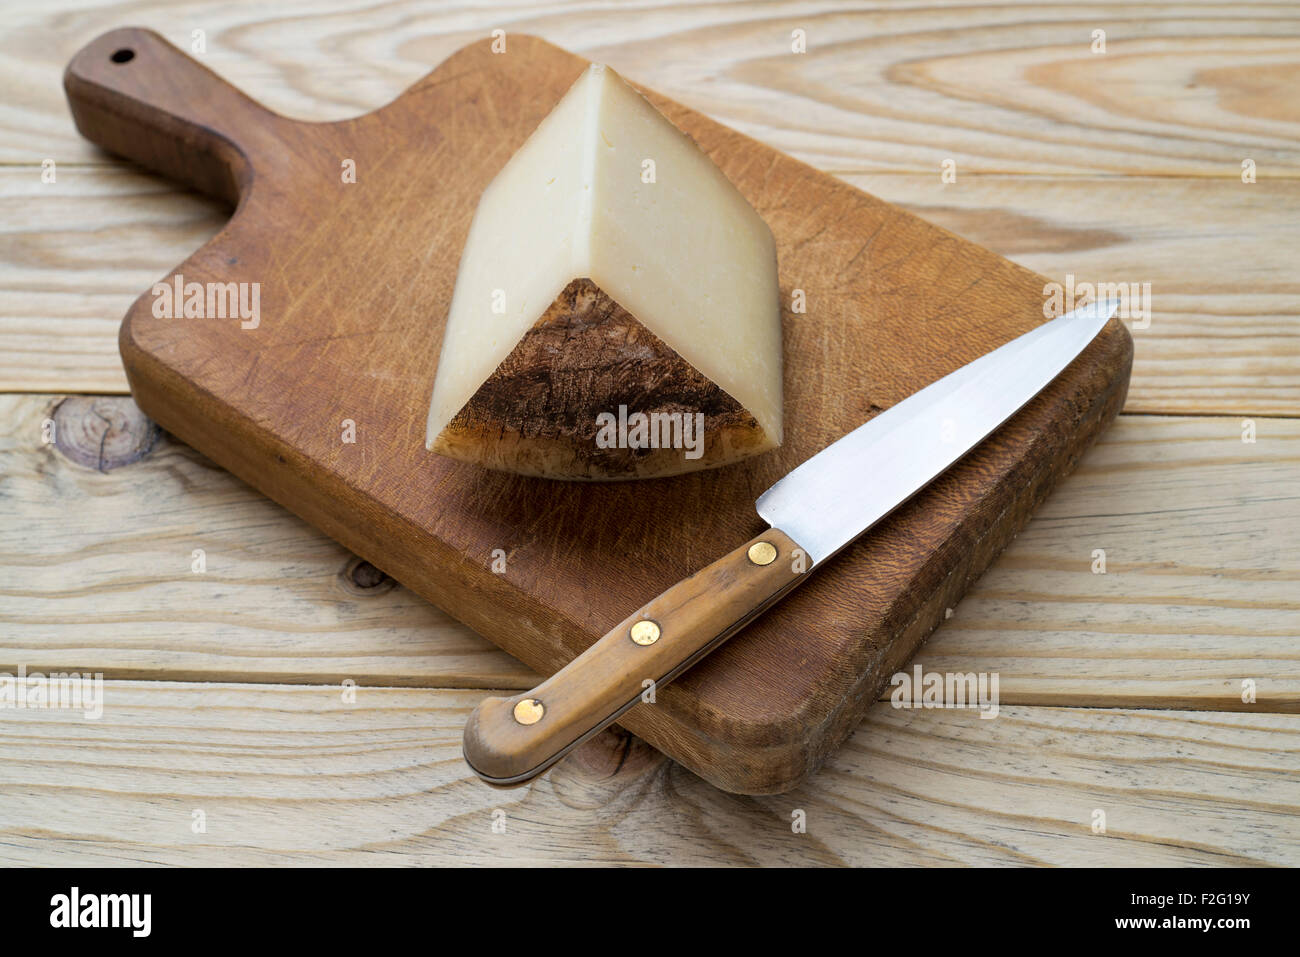 Cheese and knife on cutting board Stock Photo